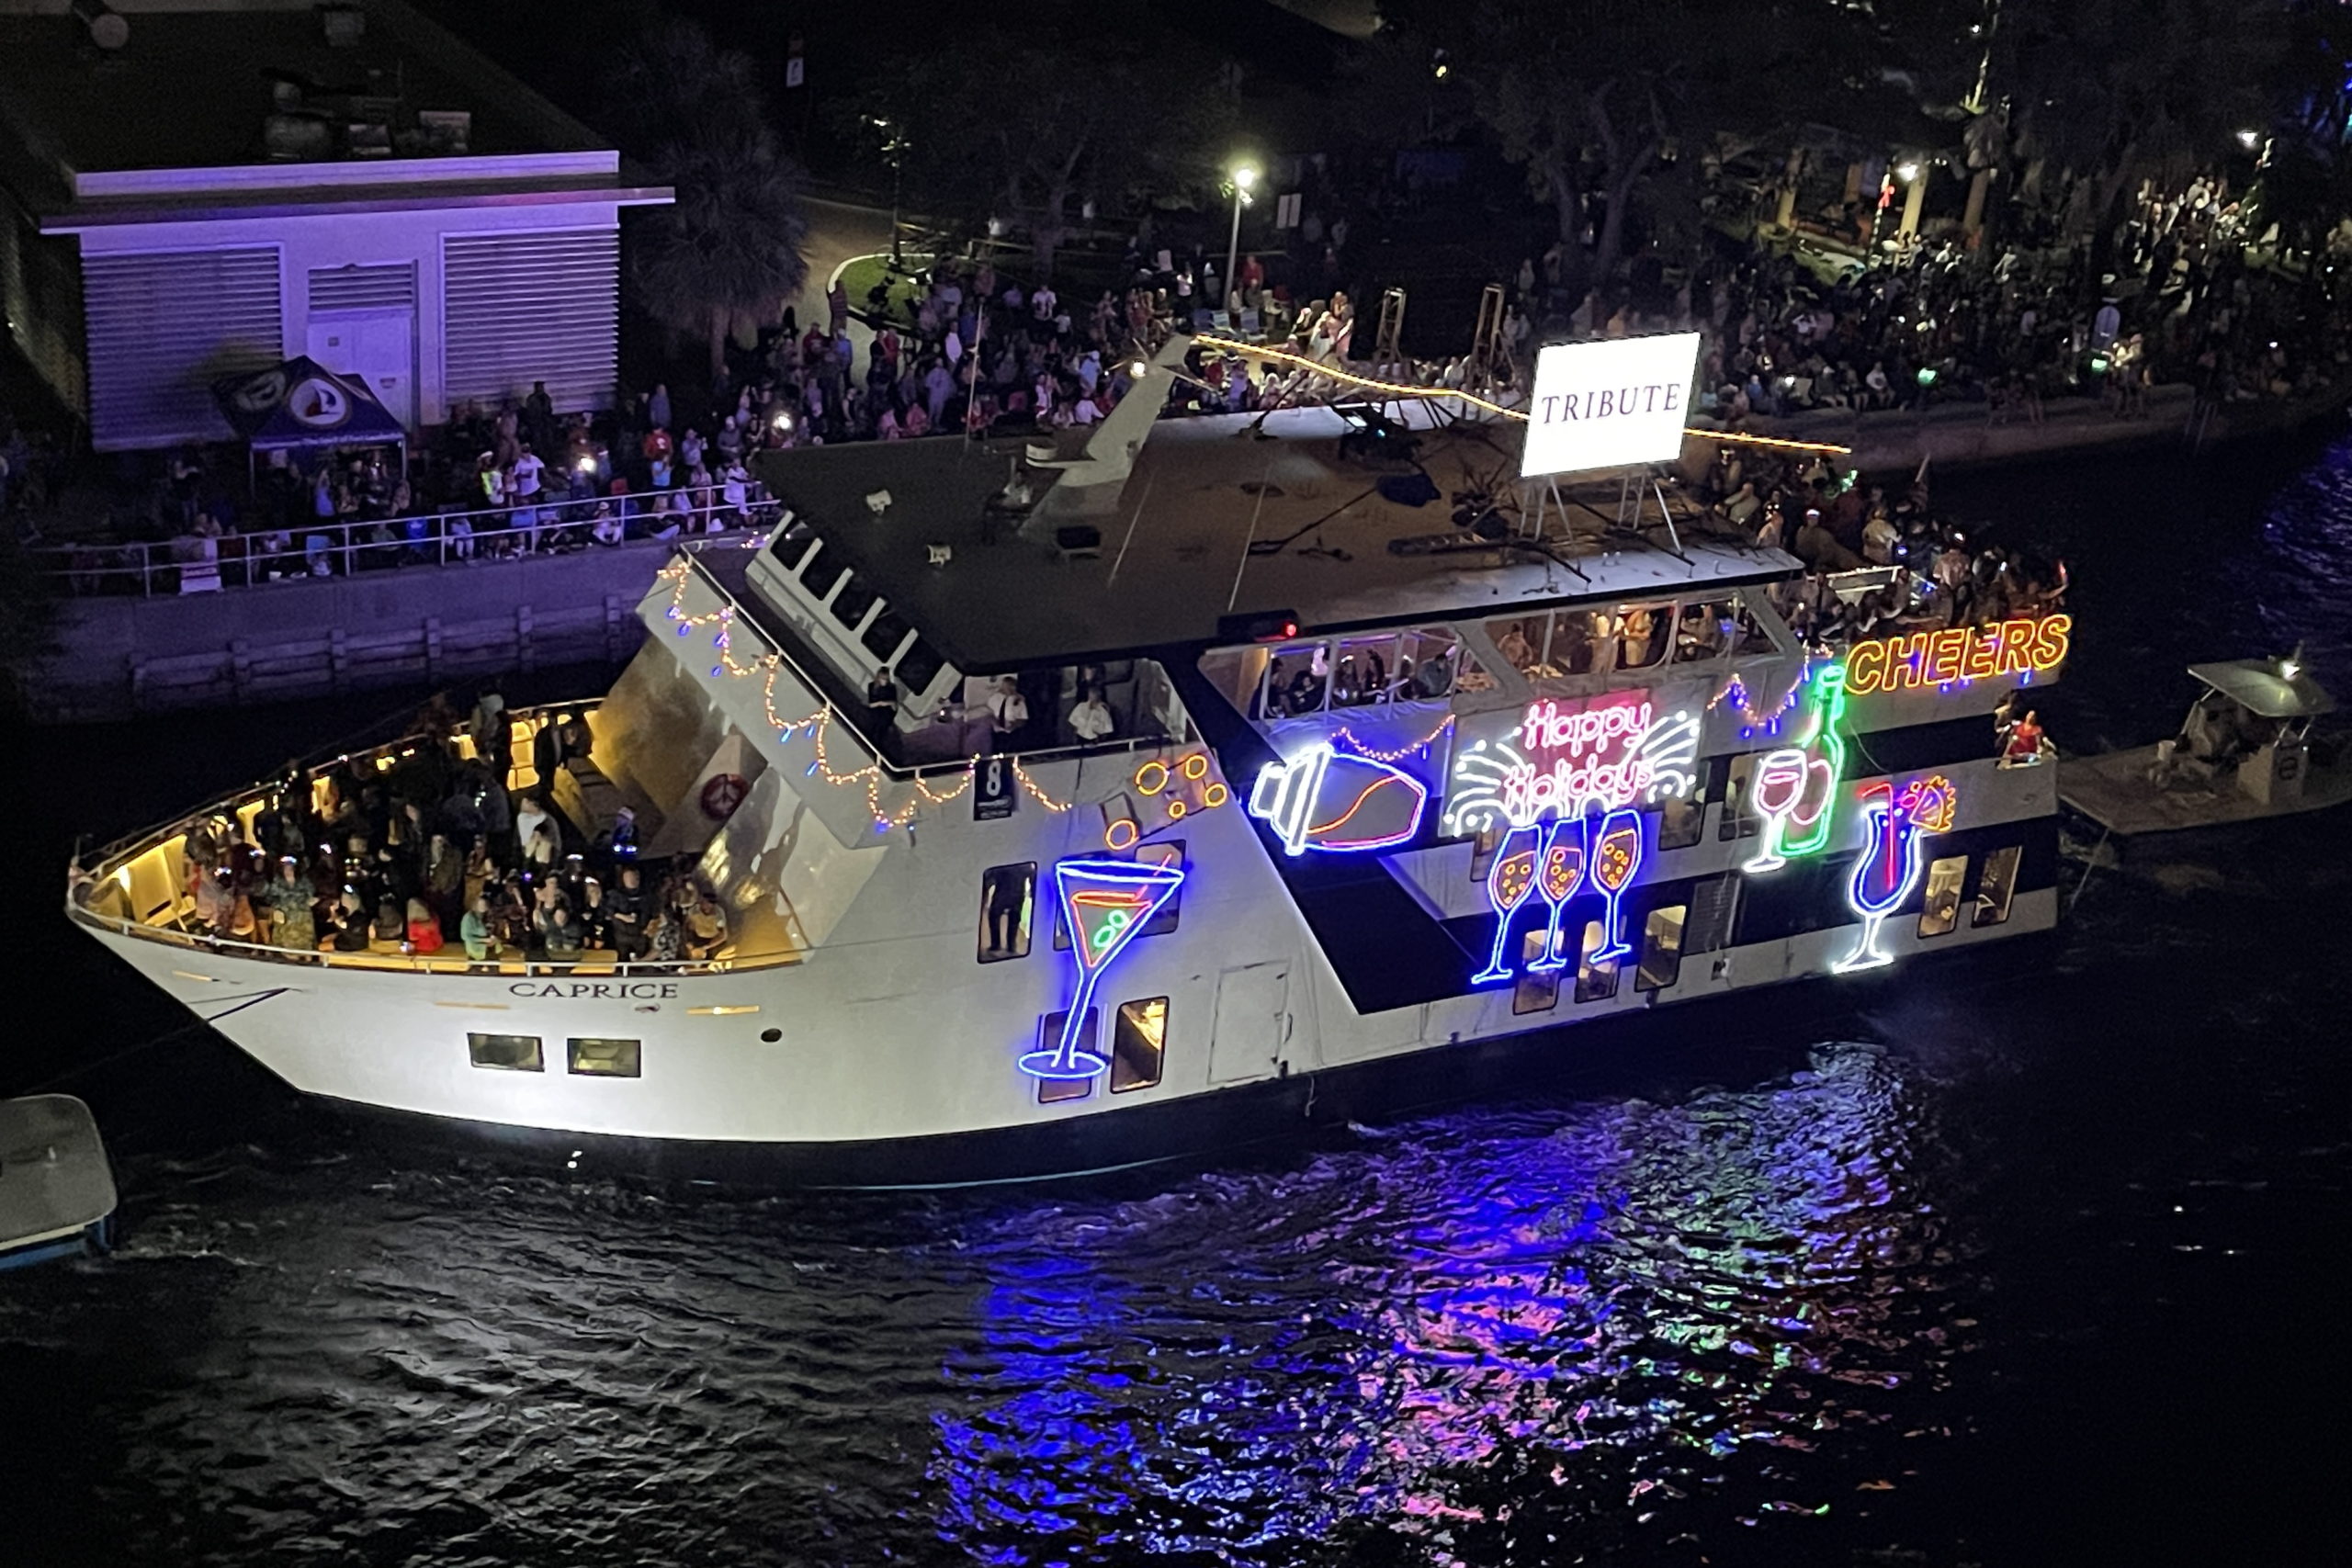 Caprice, boat number 8 in the 2022 Winterfest Boat Parade